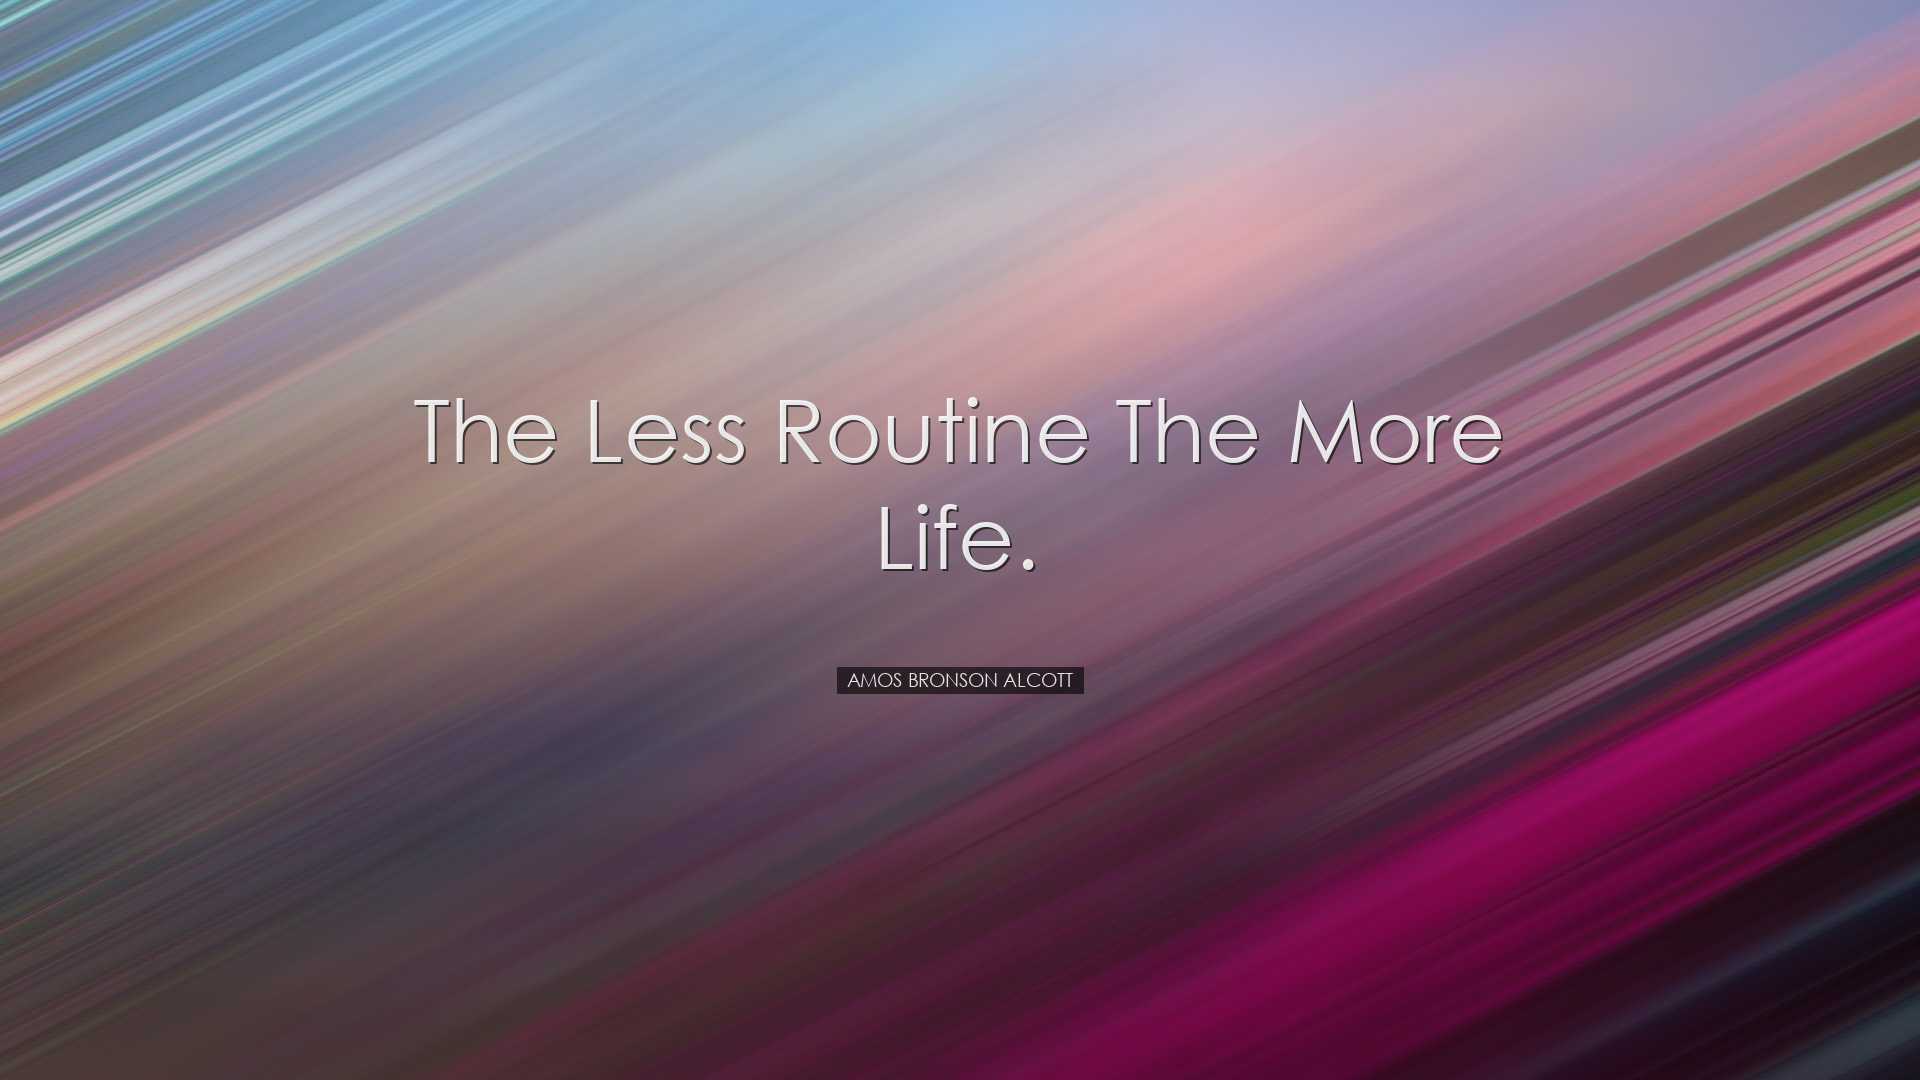 The less routine the more life. - Amos Bronson Alcott